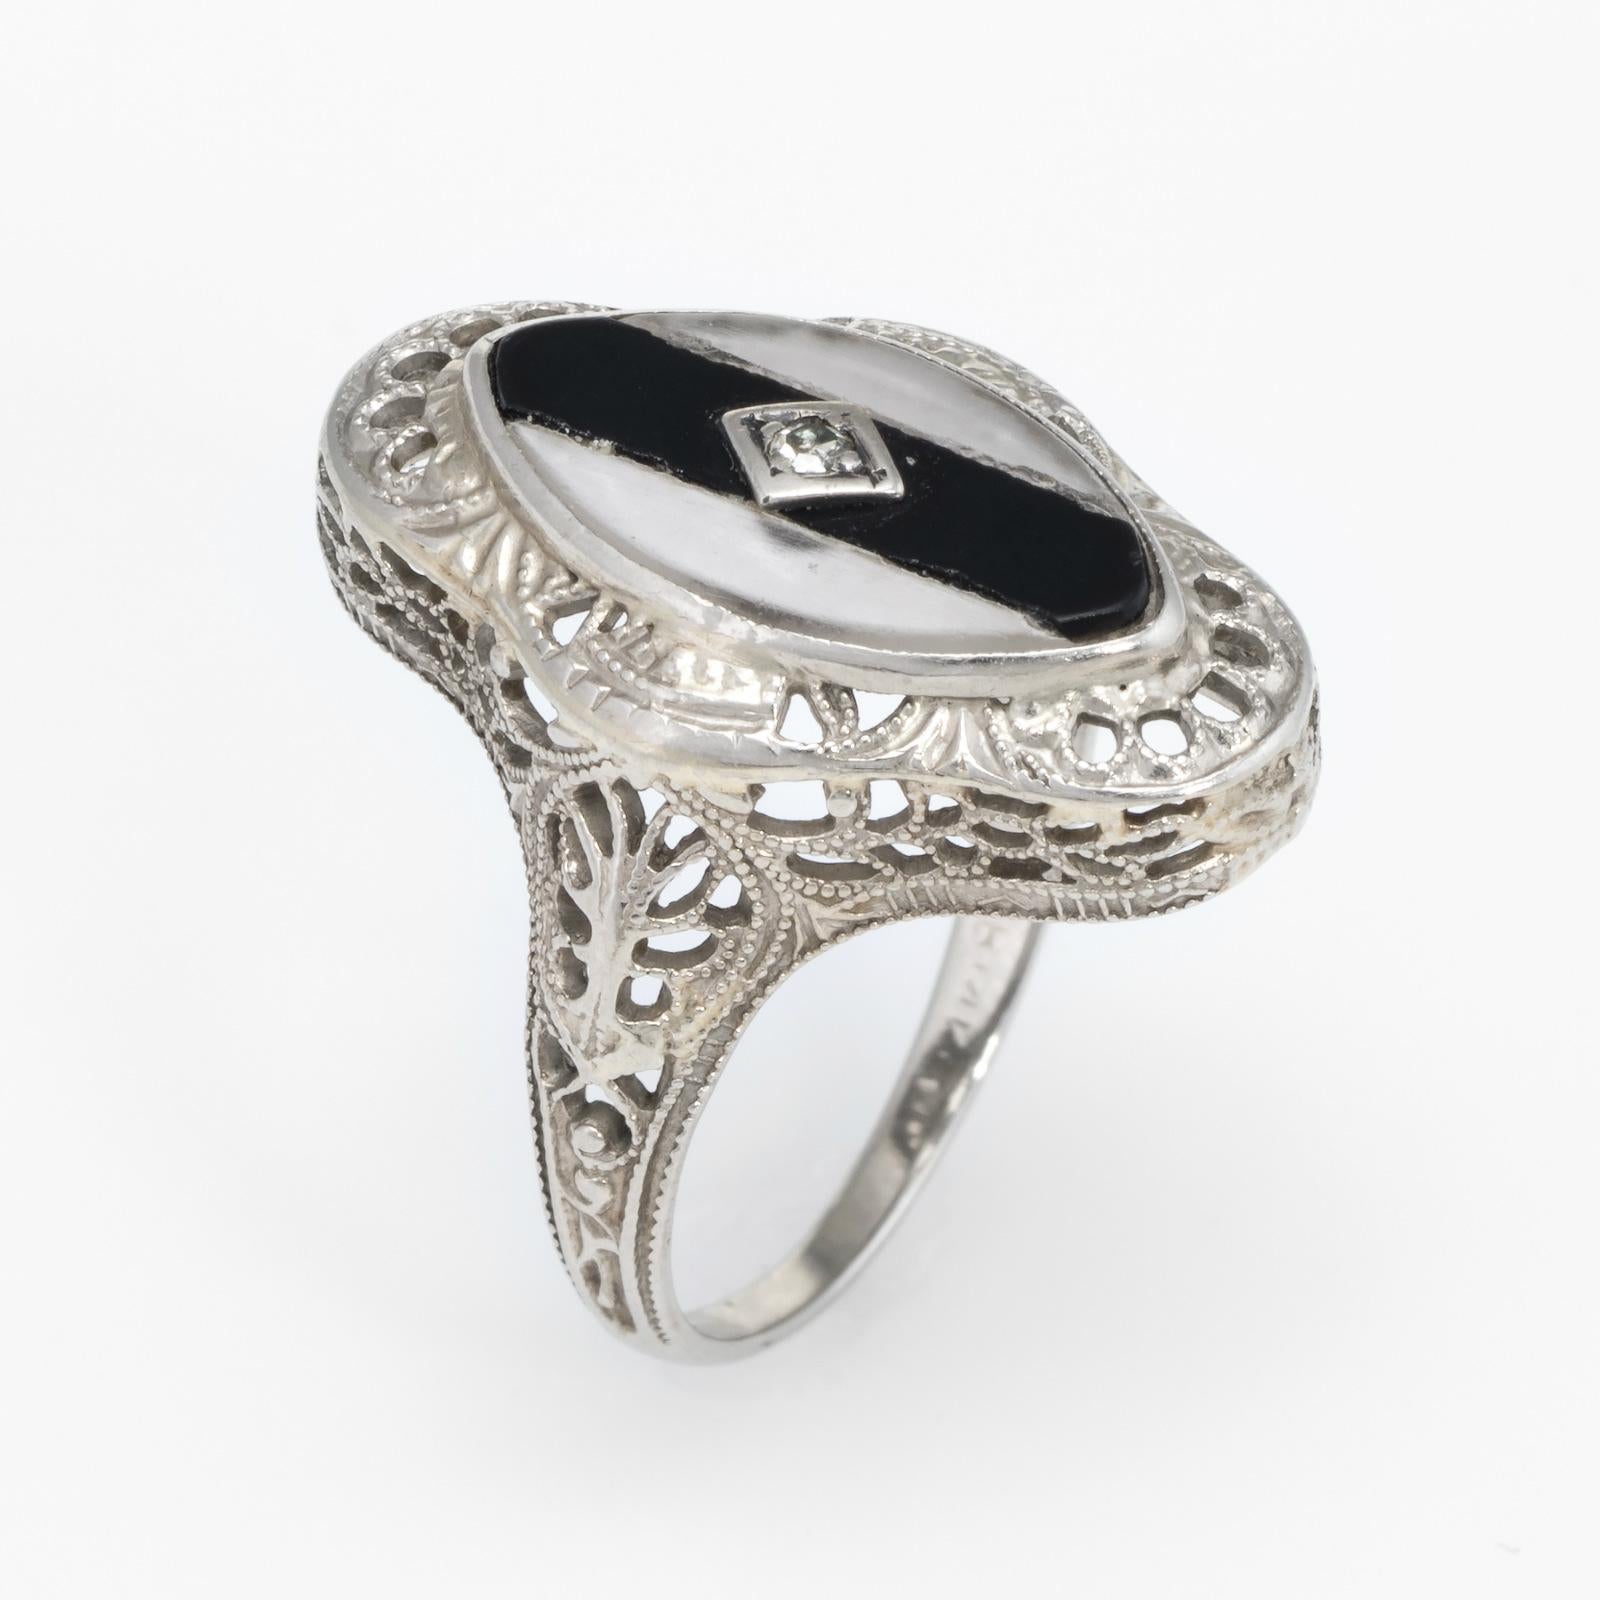 Finely detailed Art Deco era ring (circa 1920s to 1930s), crafted in 14 karat white gold.

The ring is made by Ostby & Barton, one of the most well known jewelry manufacturers of the period. The firm was founded in 1879 and ceased production around